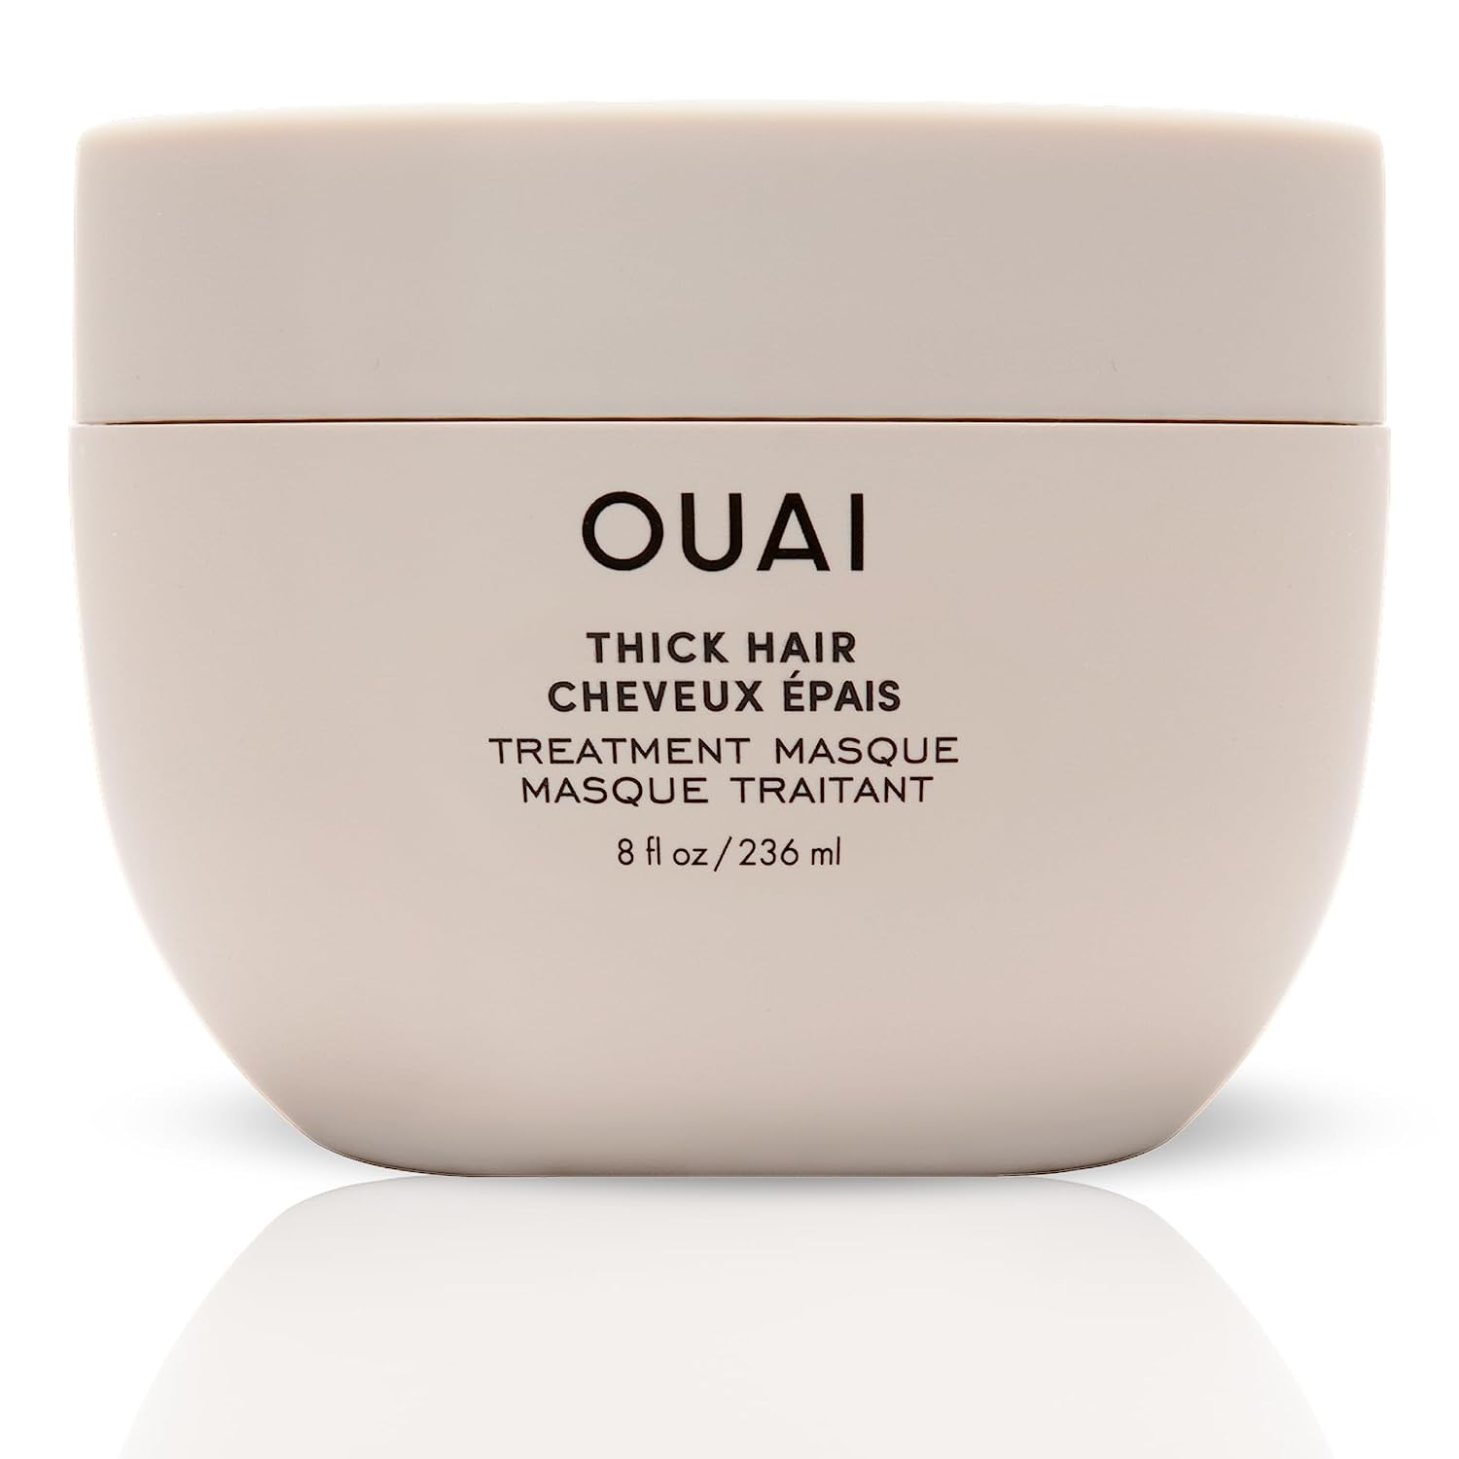 A jar of OUAI thick hair treatment masque, on sale during prime big deal days